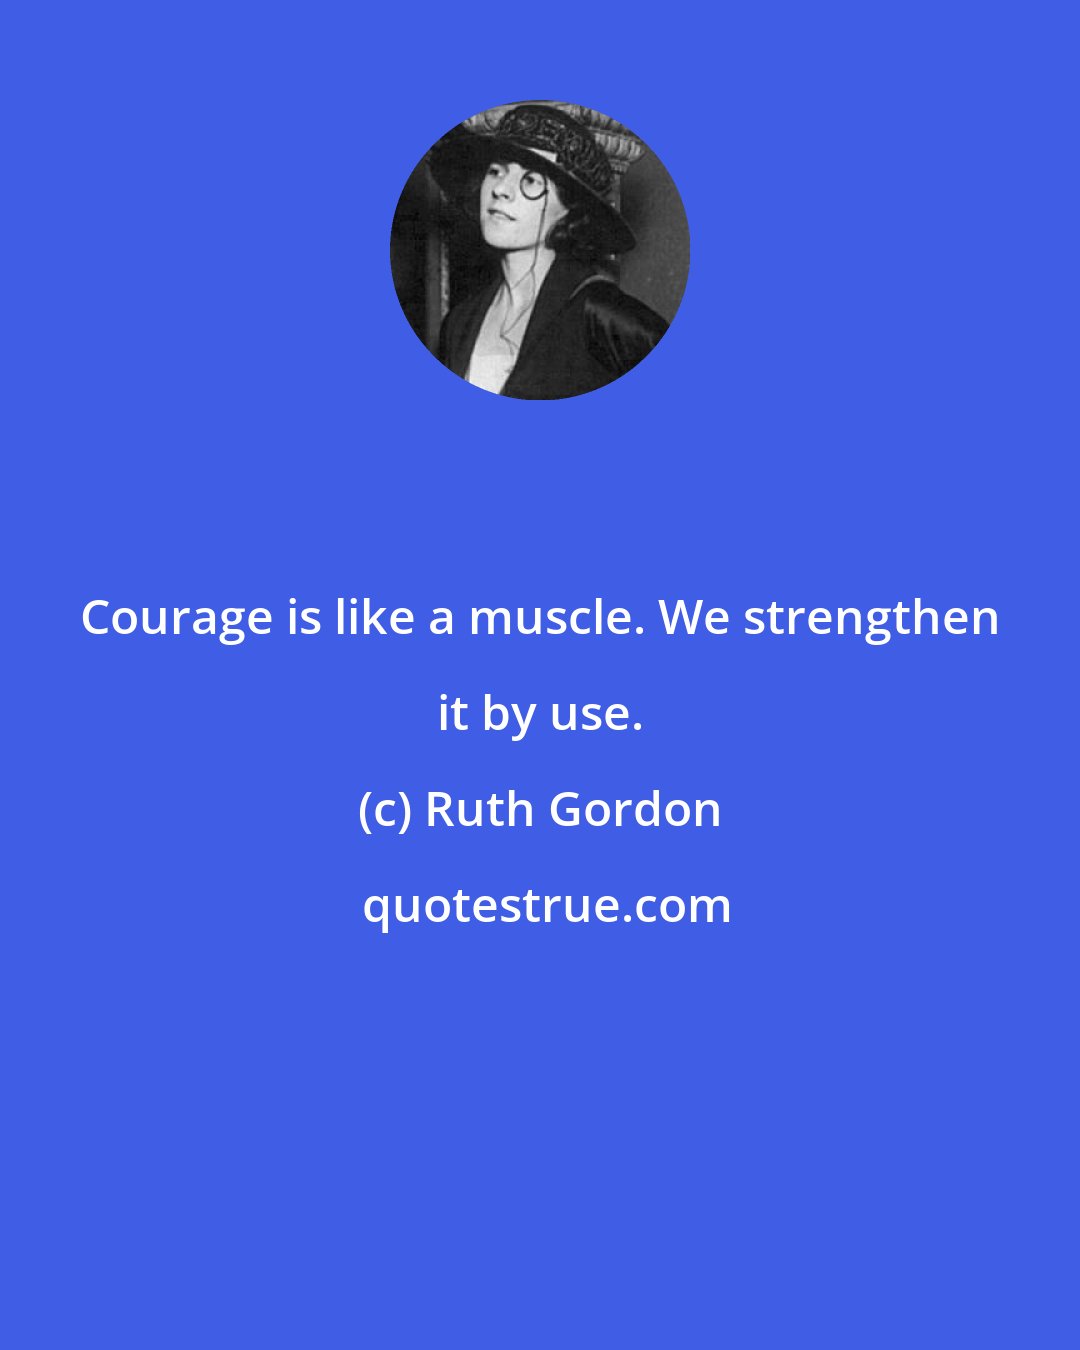 Ruth Gordon: Courage is like a muscle. We strengthen it by use.